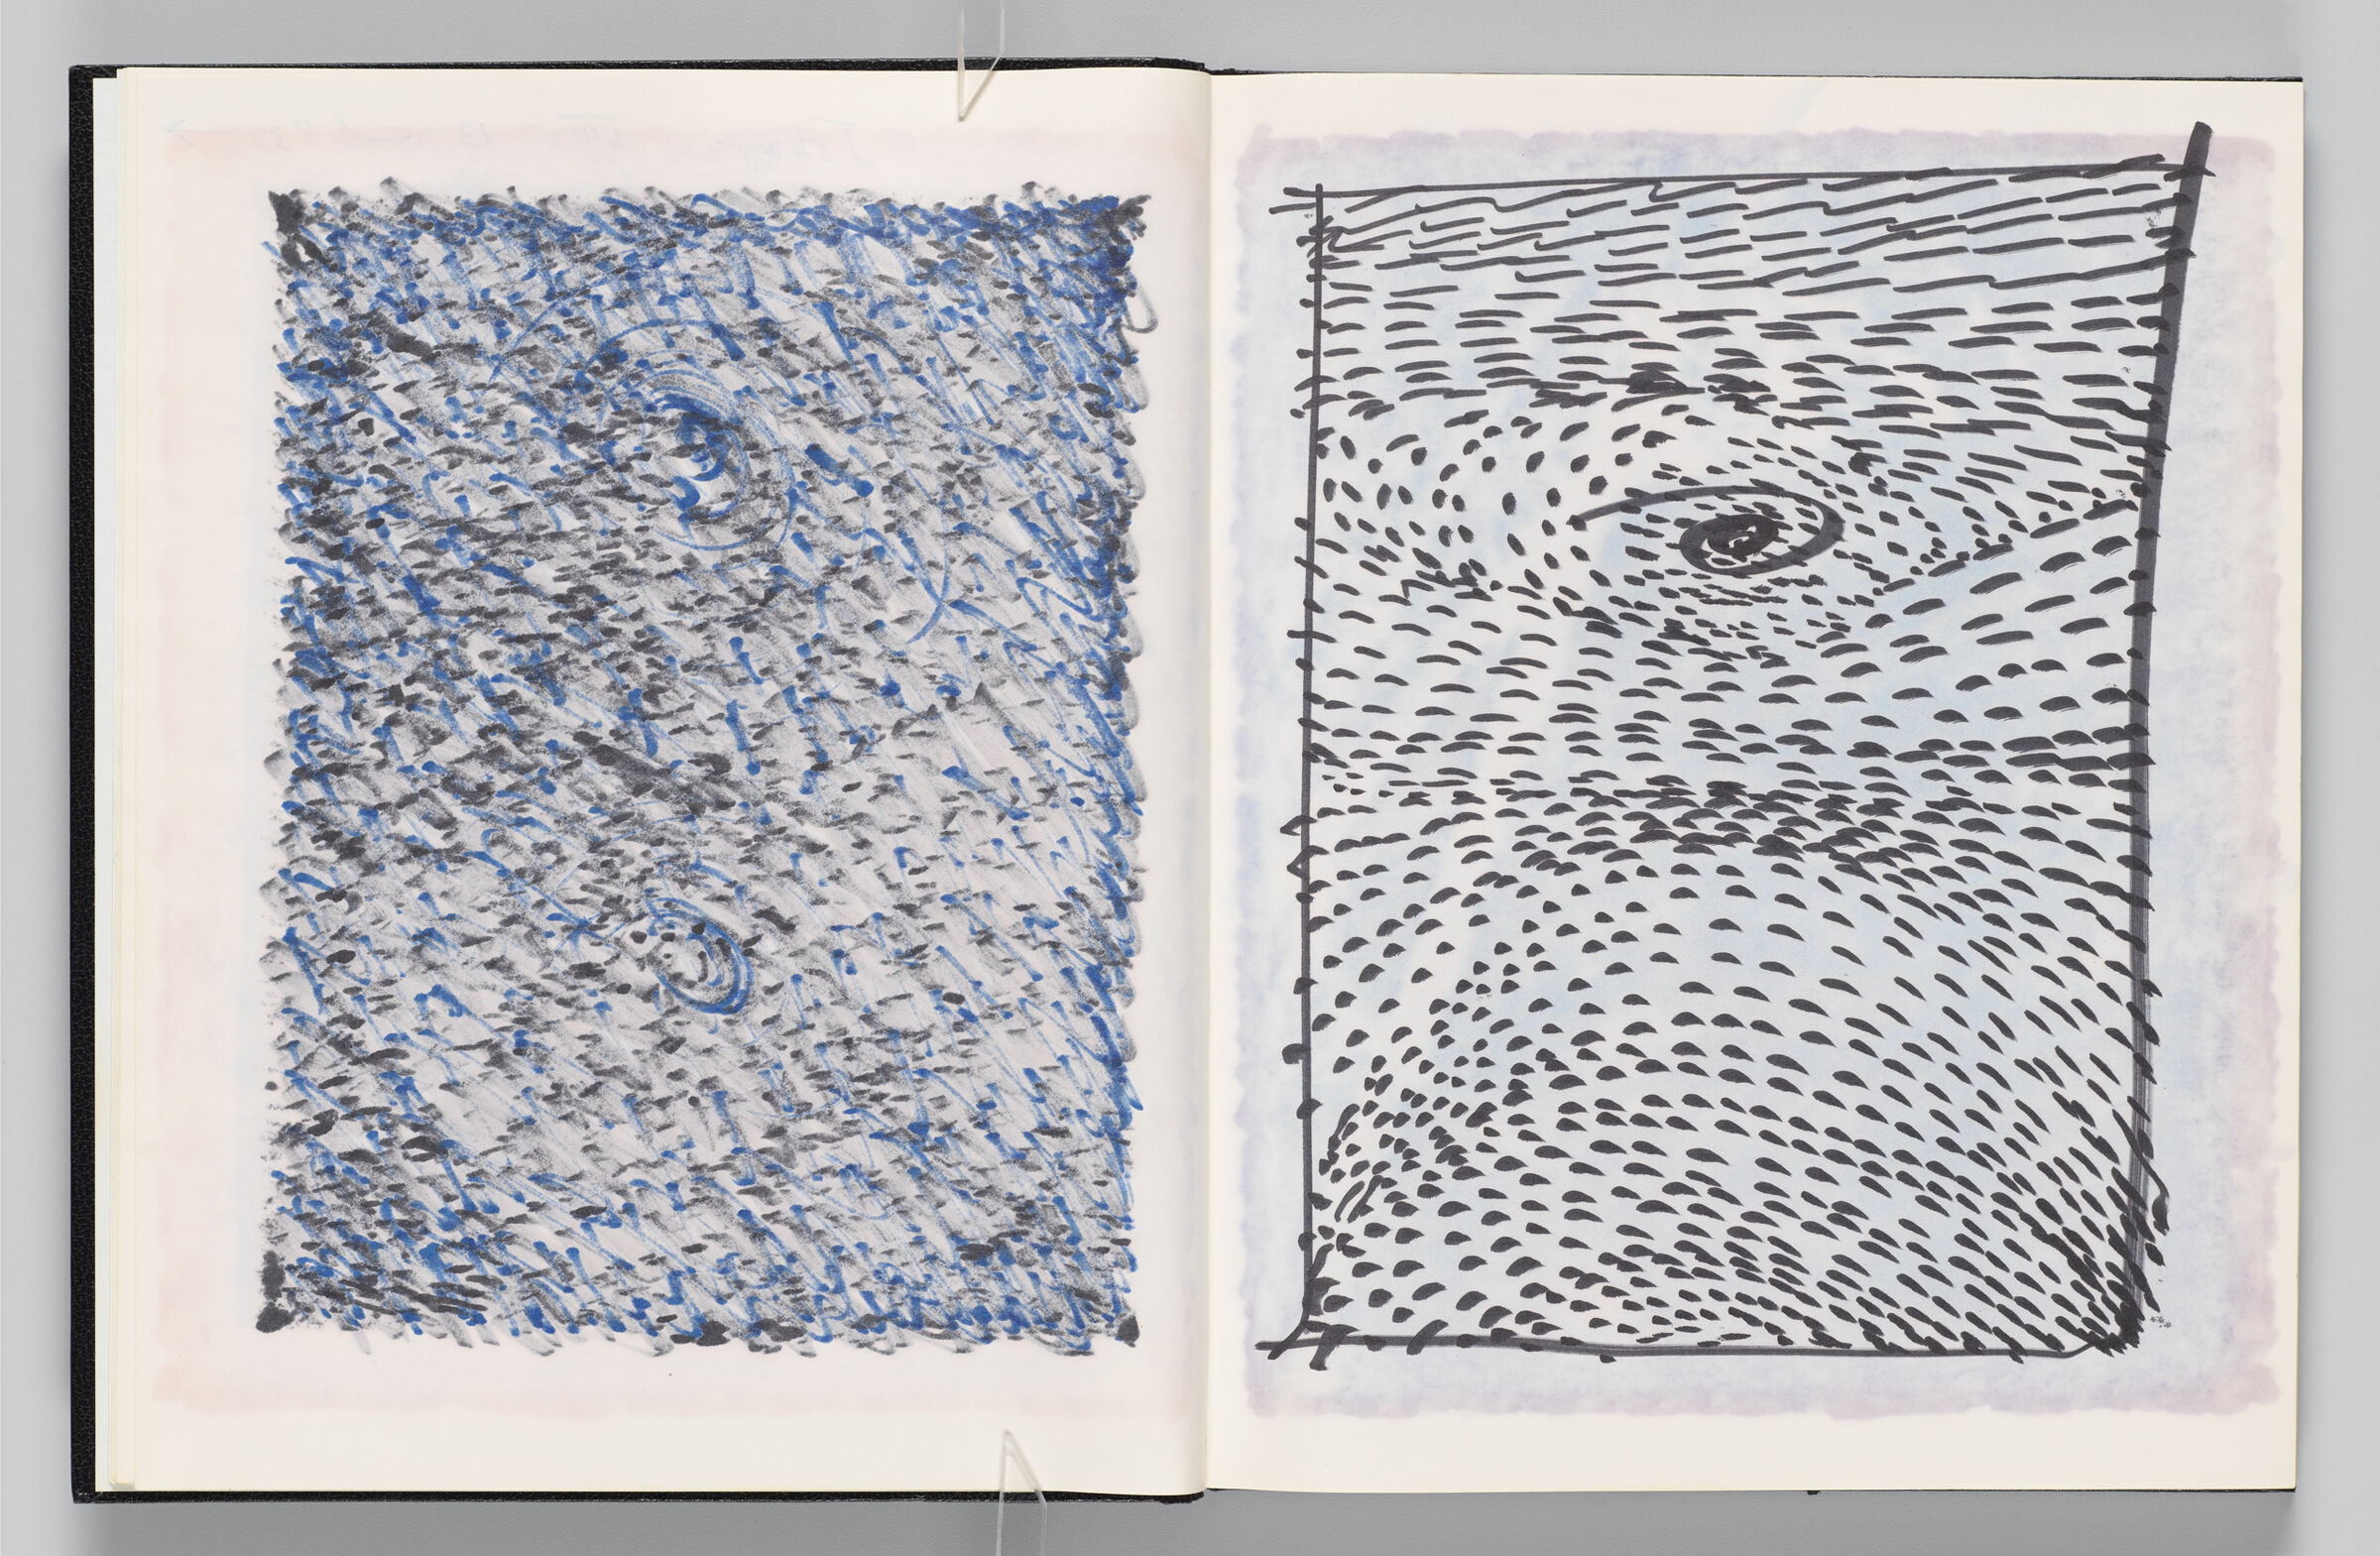 Untitled (Bleed-Through Of Previous Page, Left Page); Untitled (Sketch Of Painting With Color Transfer, Right Page)